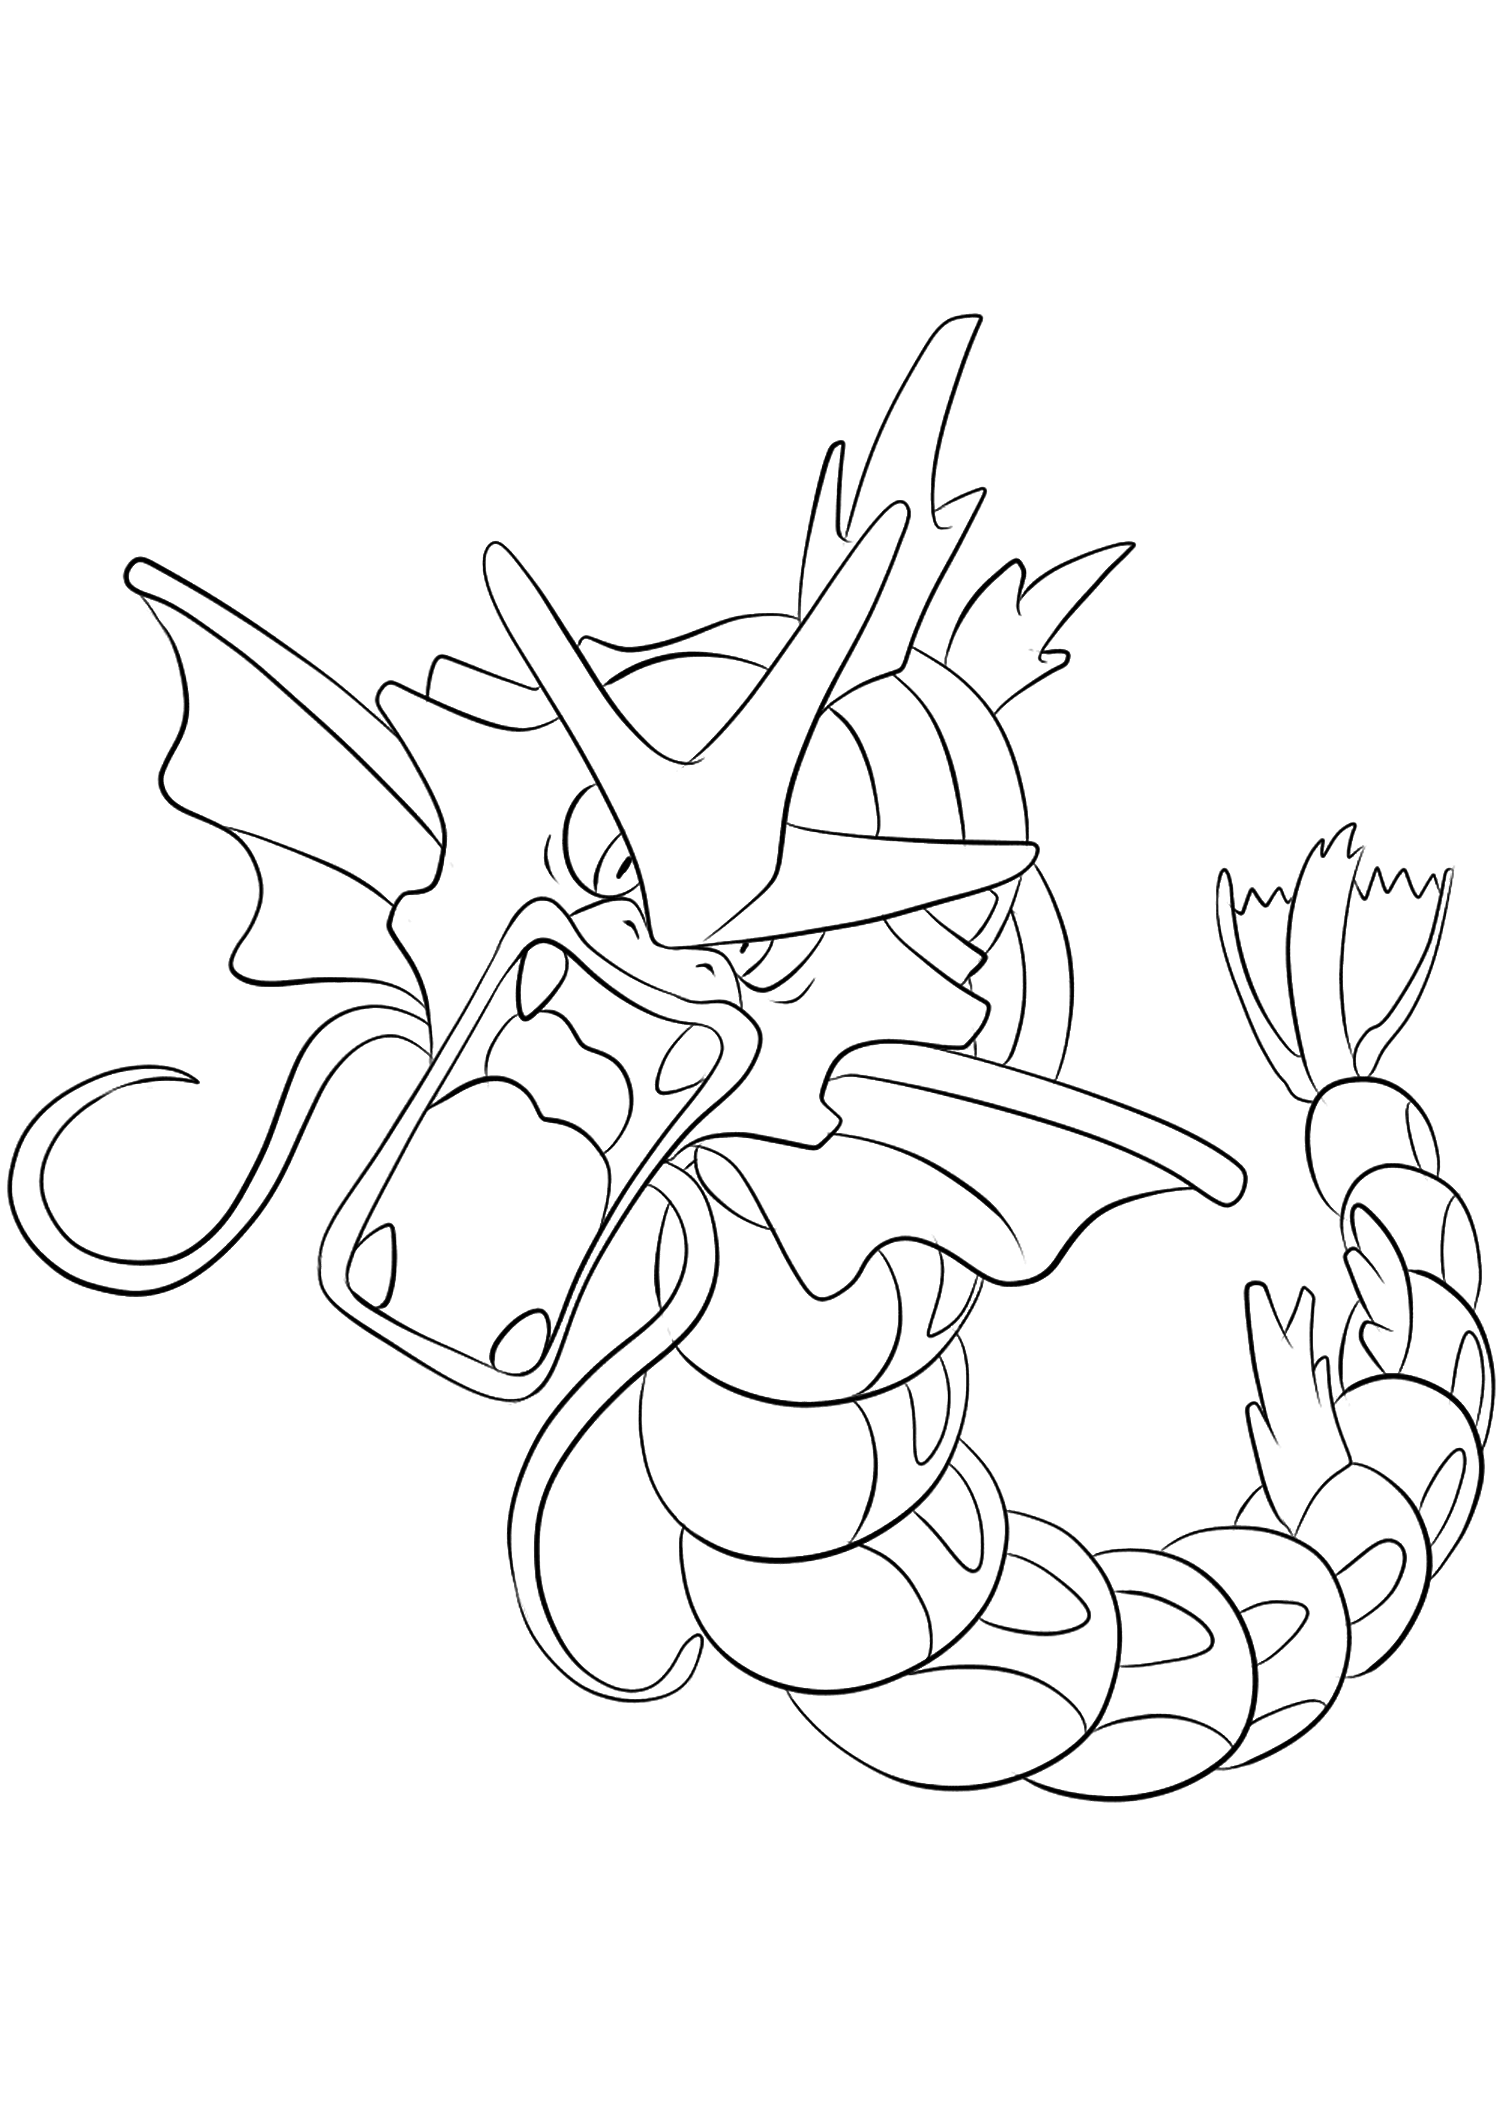 Gyarados No 130 Pokemon Generation I All Pokemon Coloring Pages Kids Coloring Pages